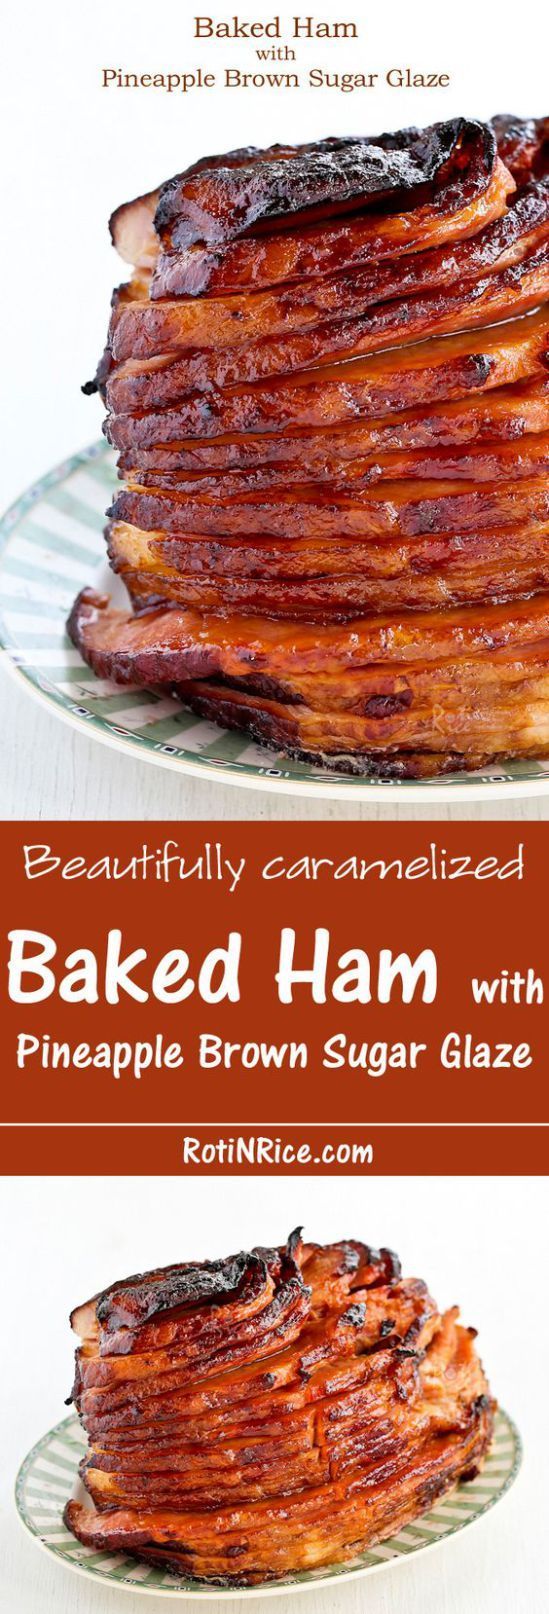 Beautifully caramelized Baked Ham with Pineapple Brown Sugar Glaze Recipe - a perfect alternative or addition to the Thanksgiving Turkey!